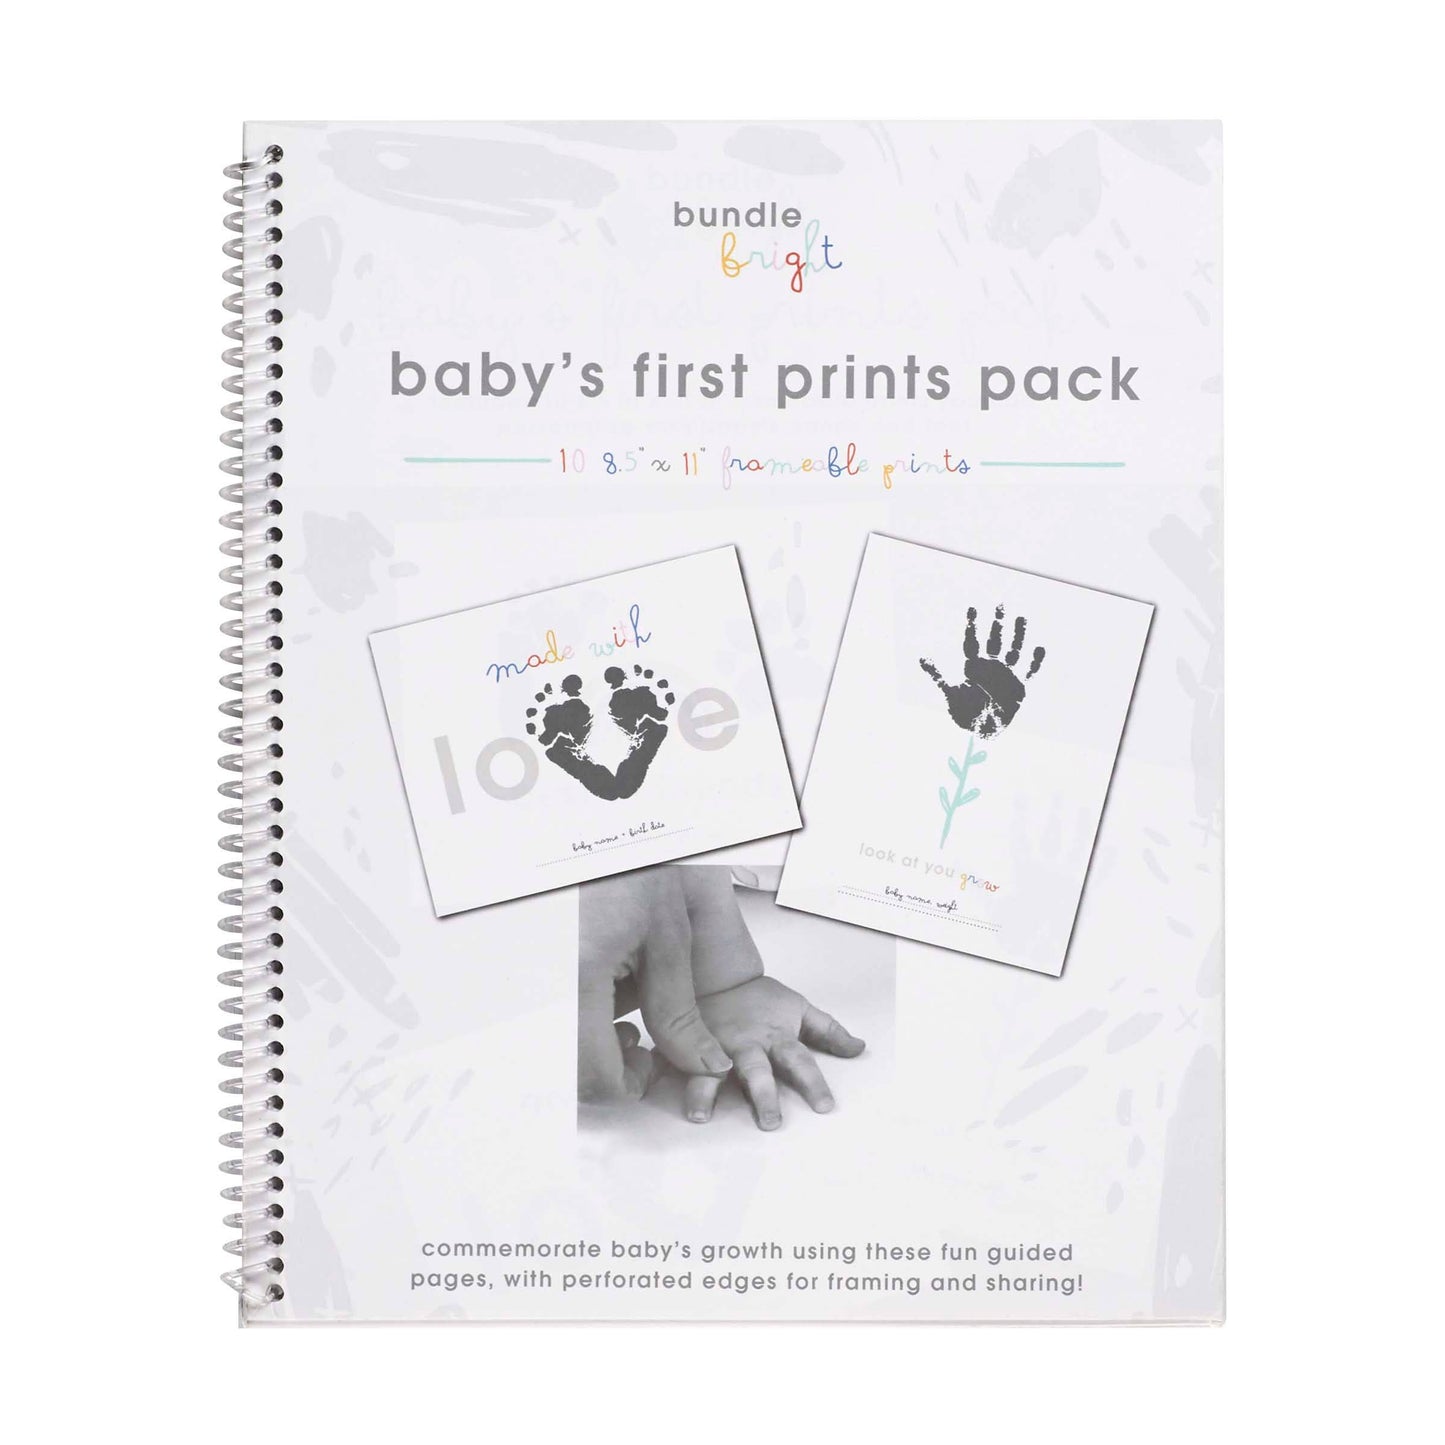 Baby's First Prints Pack